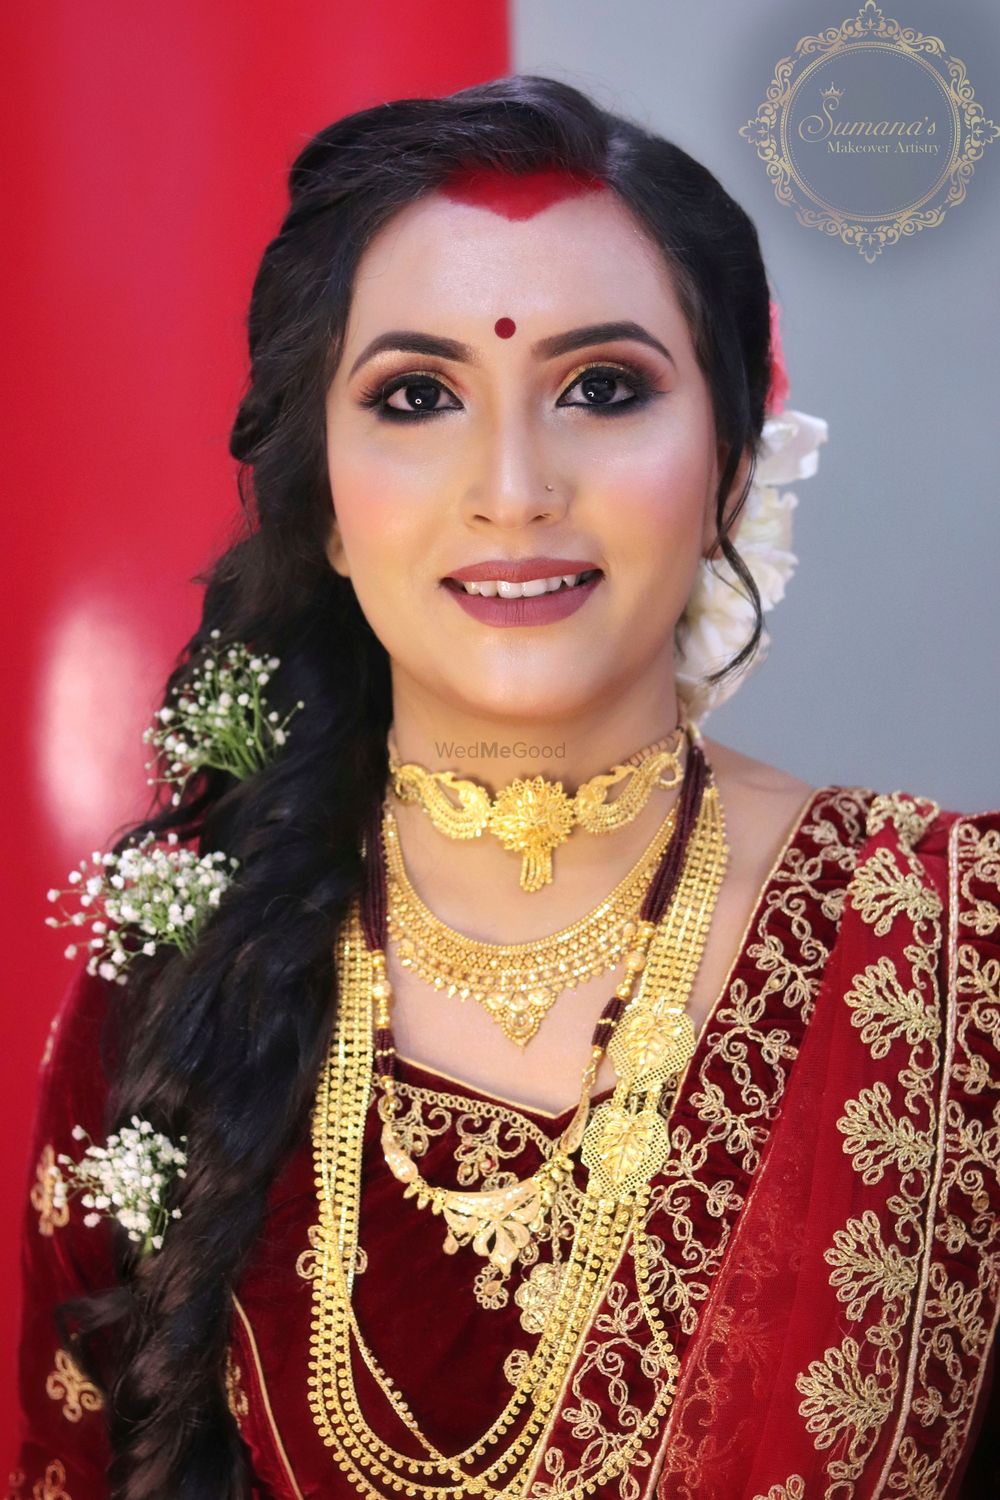 Photo From MAKEOVERS - By Sumana's Makeover Artistry